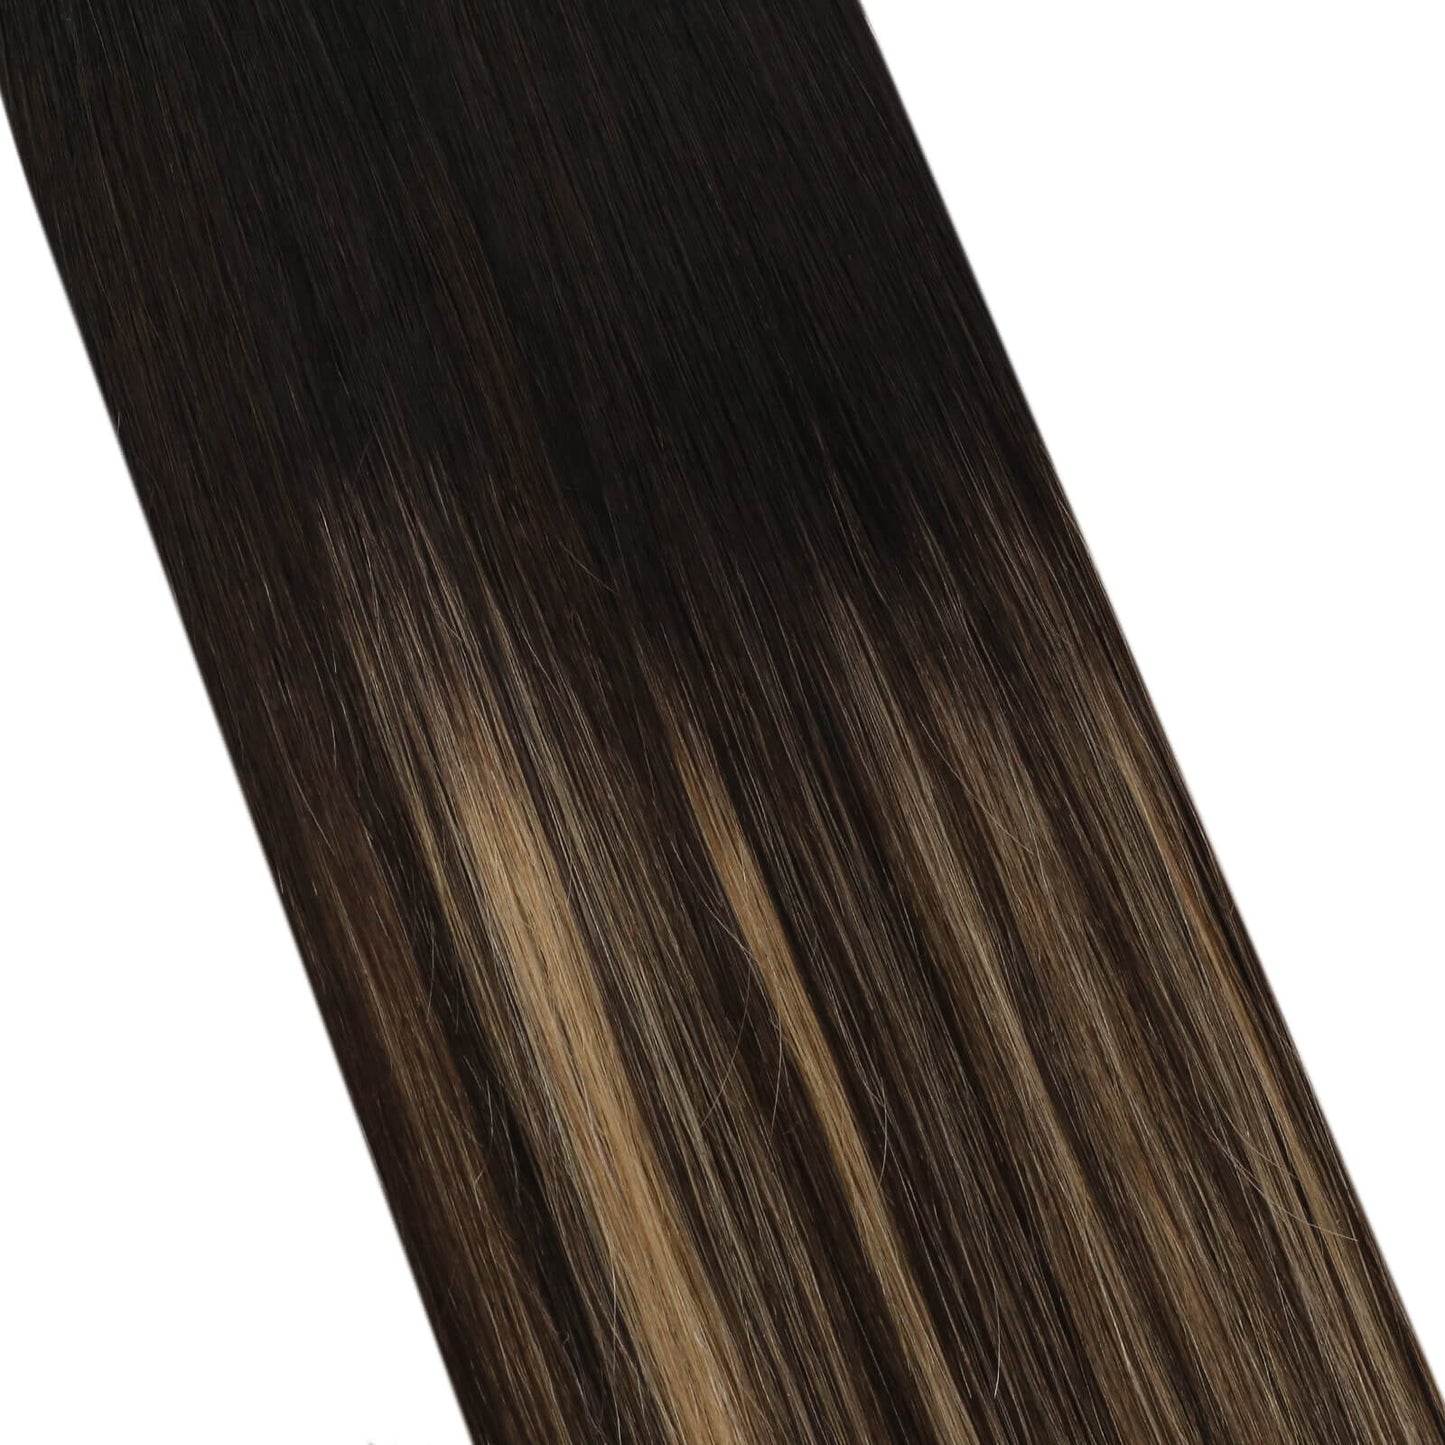 Flat tip Keratin Hair Extensions Black with Brown and Blonde #1b/4/27